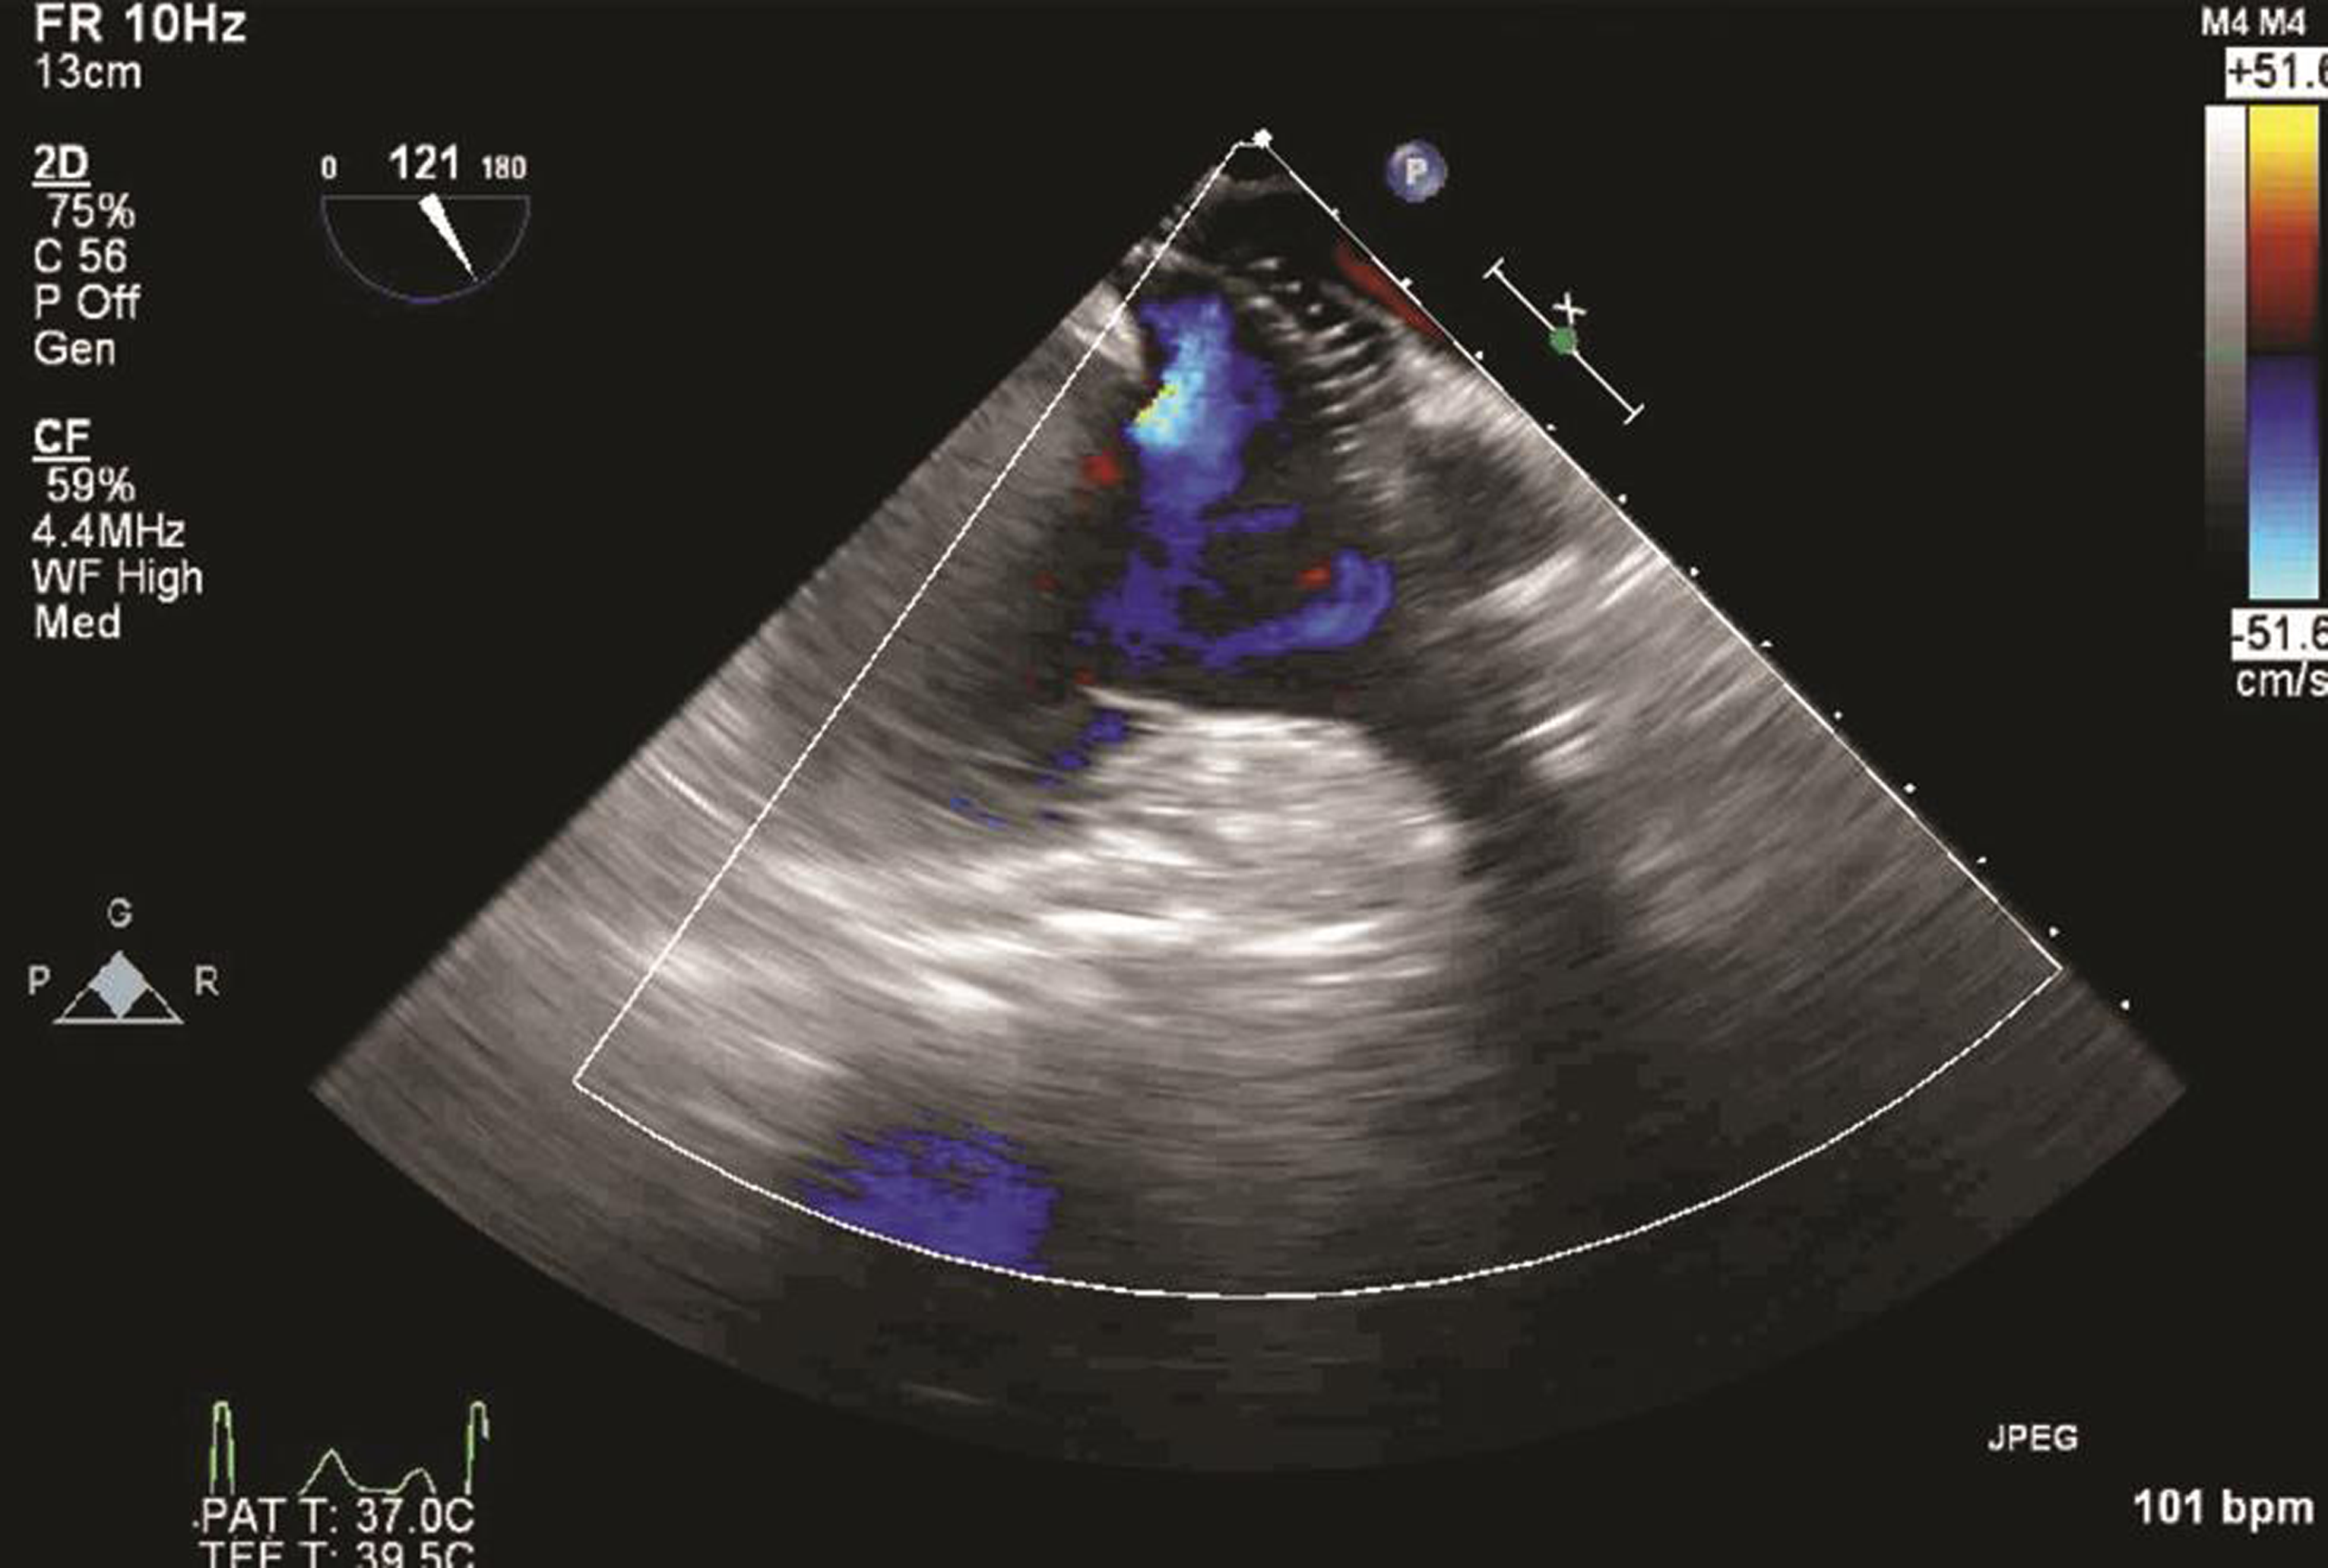 Transesophageal echocardiography midesophageal modified bicaval view, showing dislodged atrial septal defect device occluder.